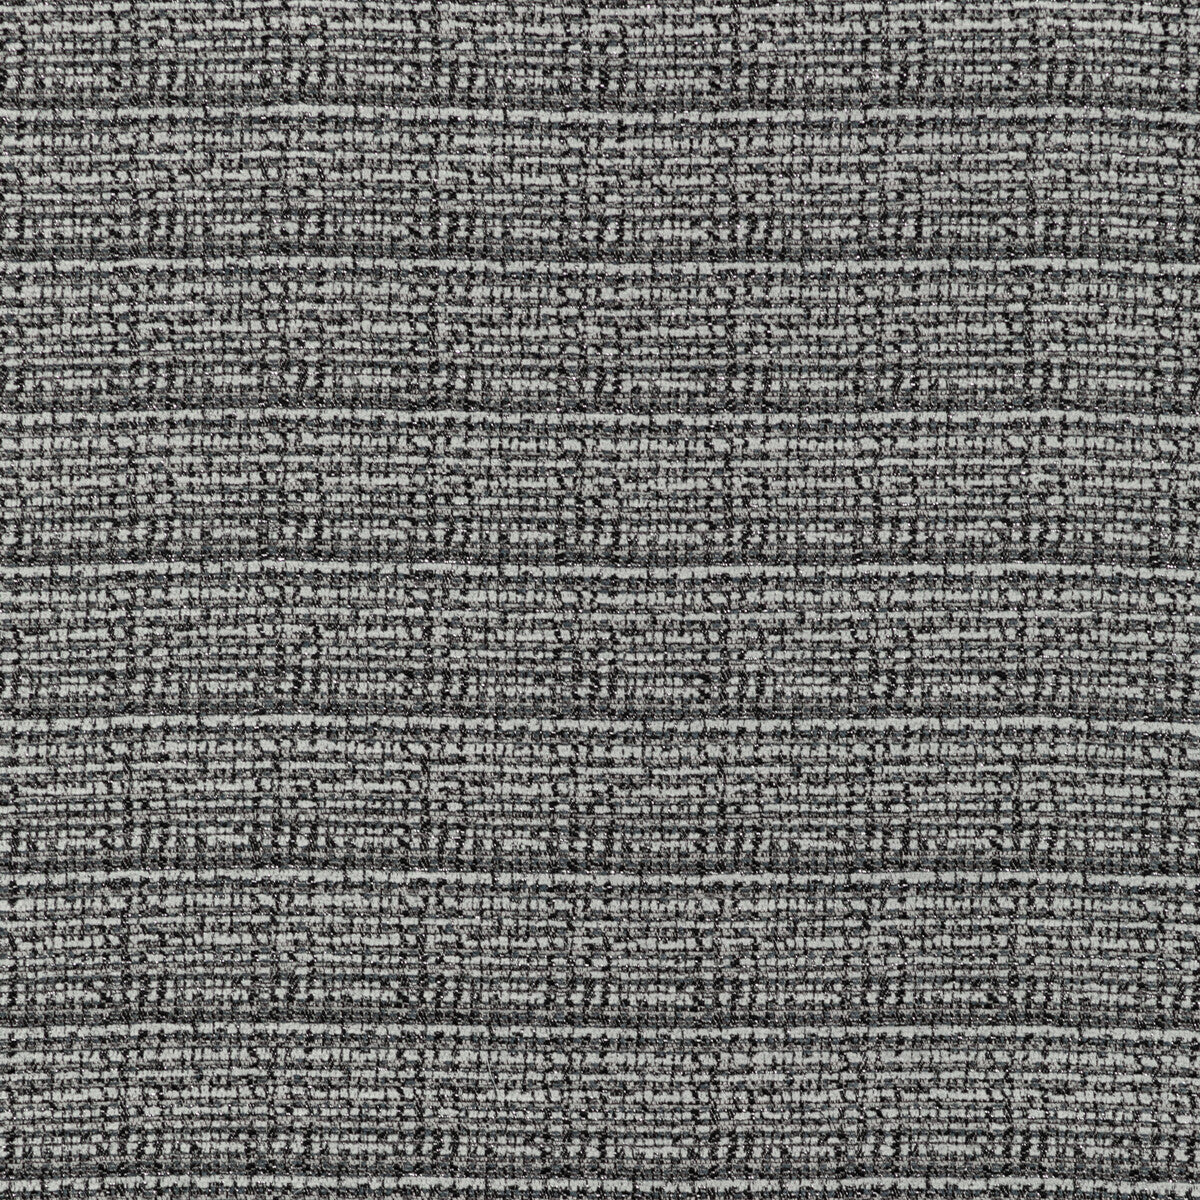 Ferla fabric in moonstone color - pattern 36313.815.0 - by Kravet Contract